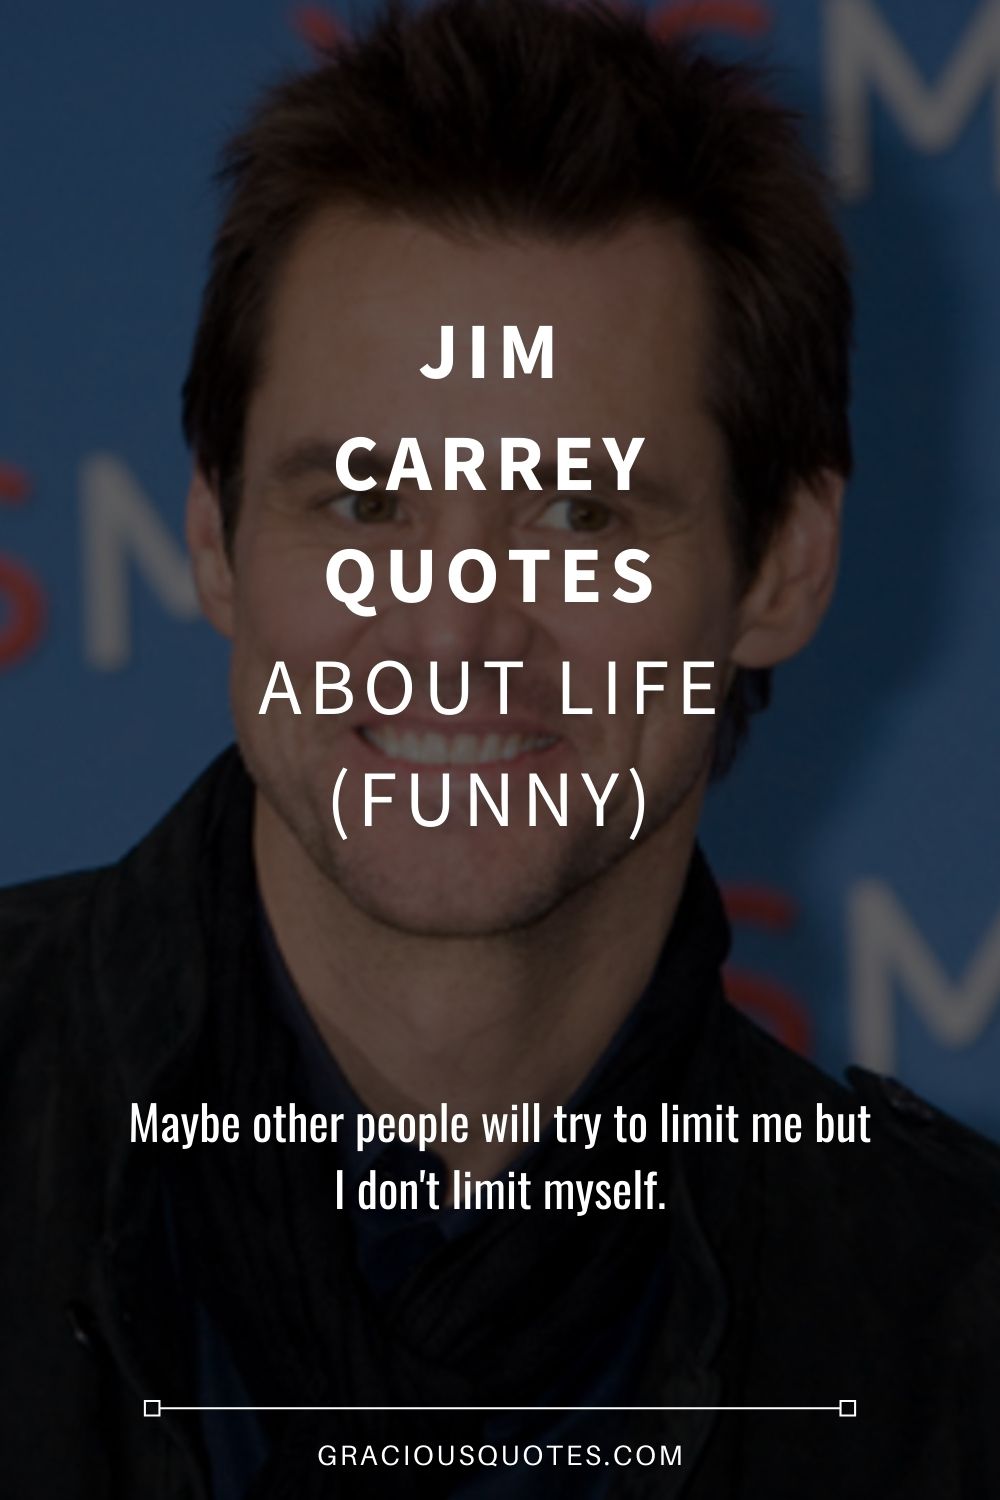 Jim Carrey Quotes About Life (FUNNY) - Gracious Quotes